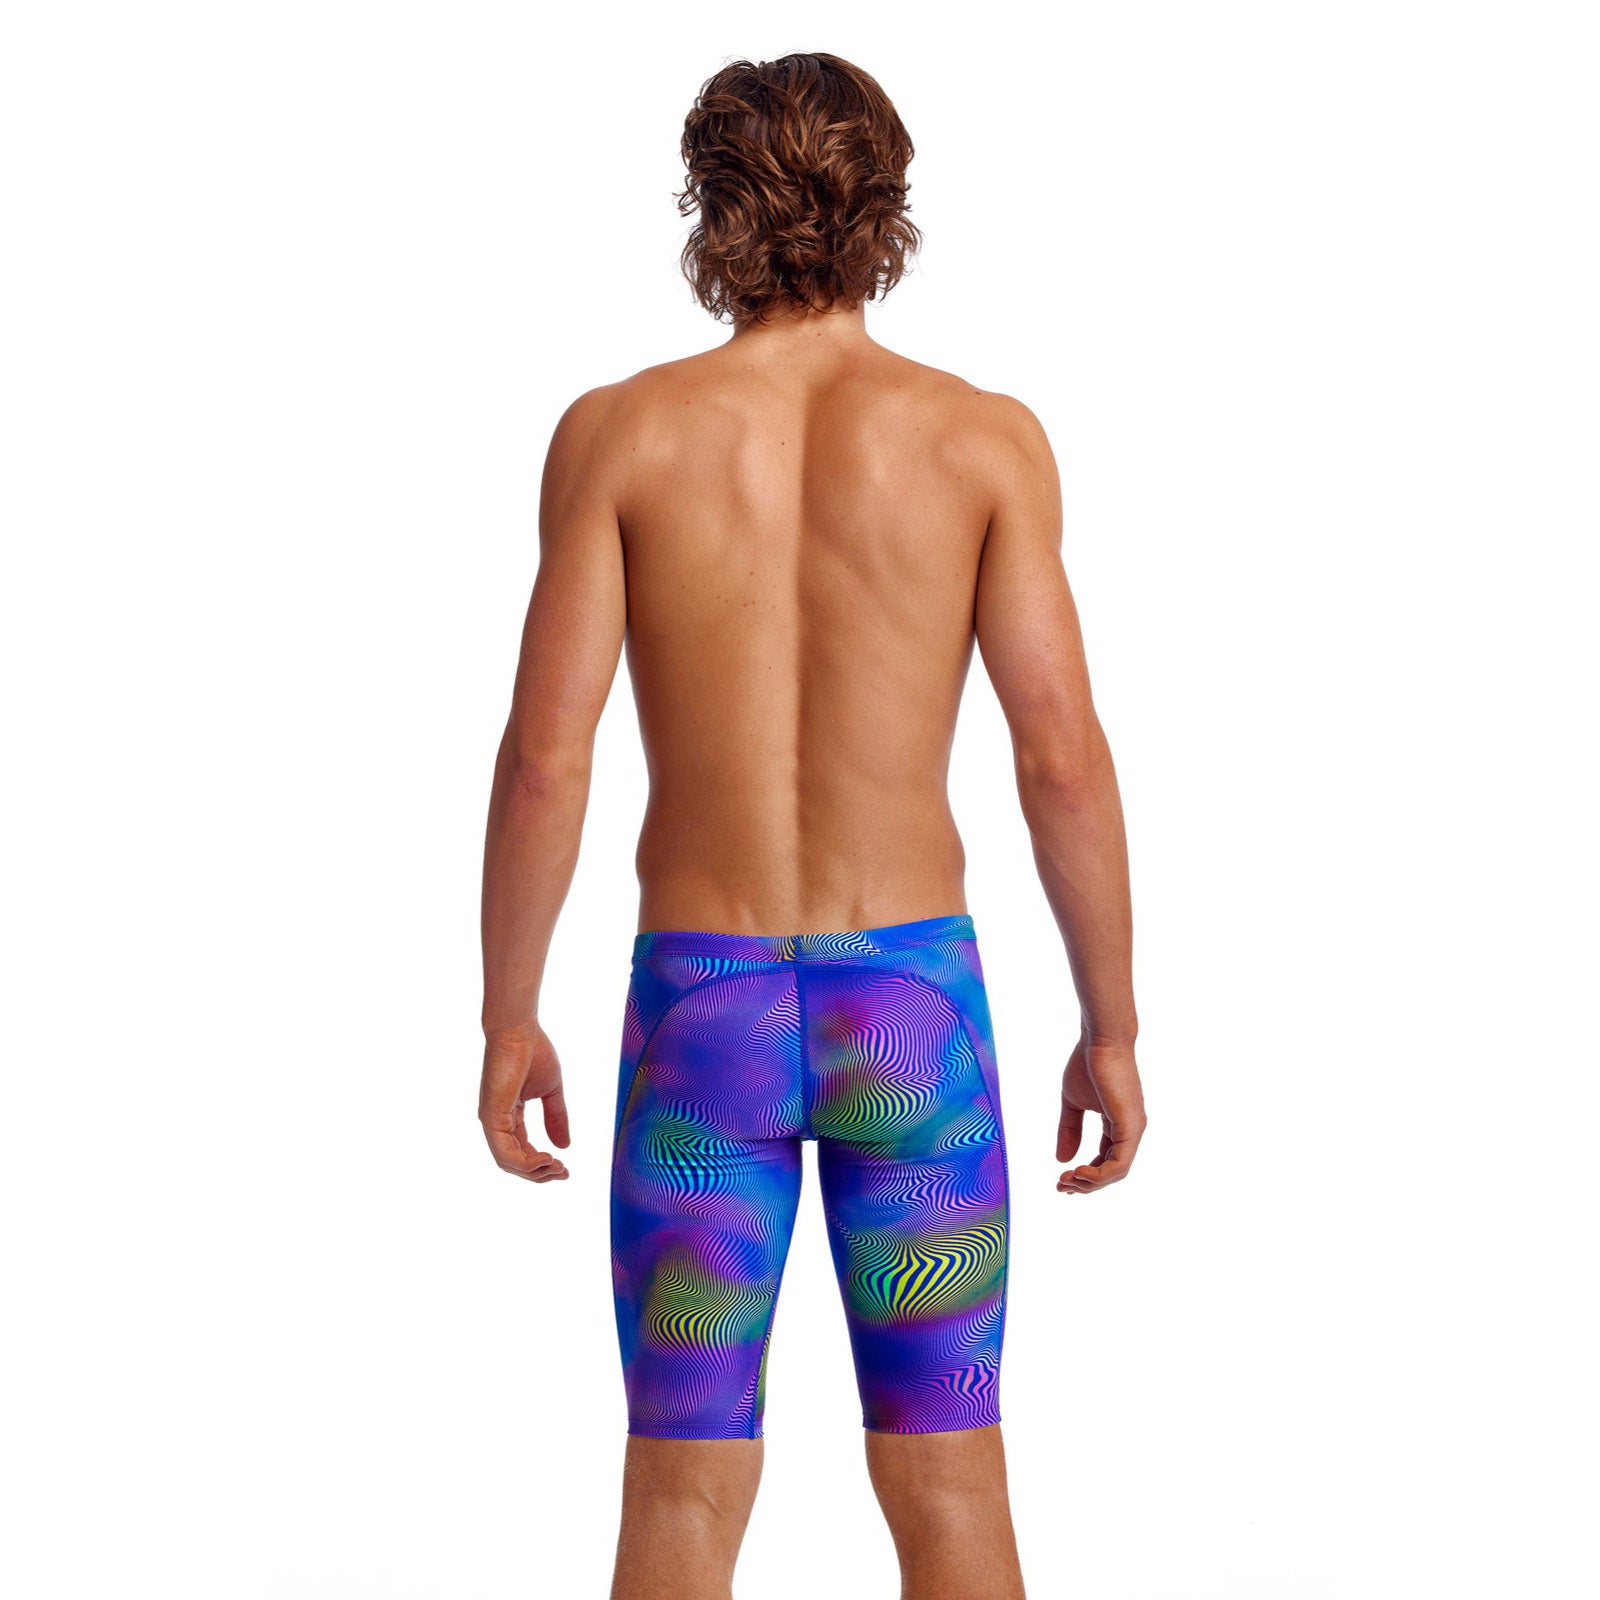 Way Funky, Mother Funky, Funky Trunks Men's Training Jammers Screen Time, Badehose, Herren